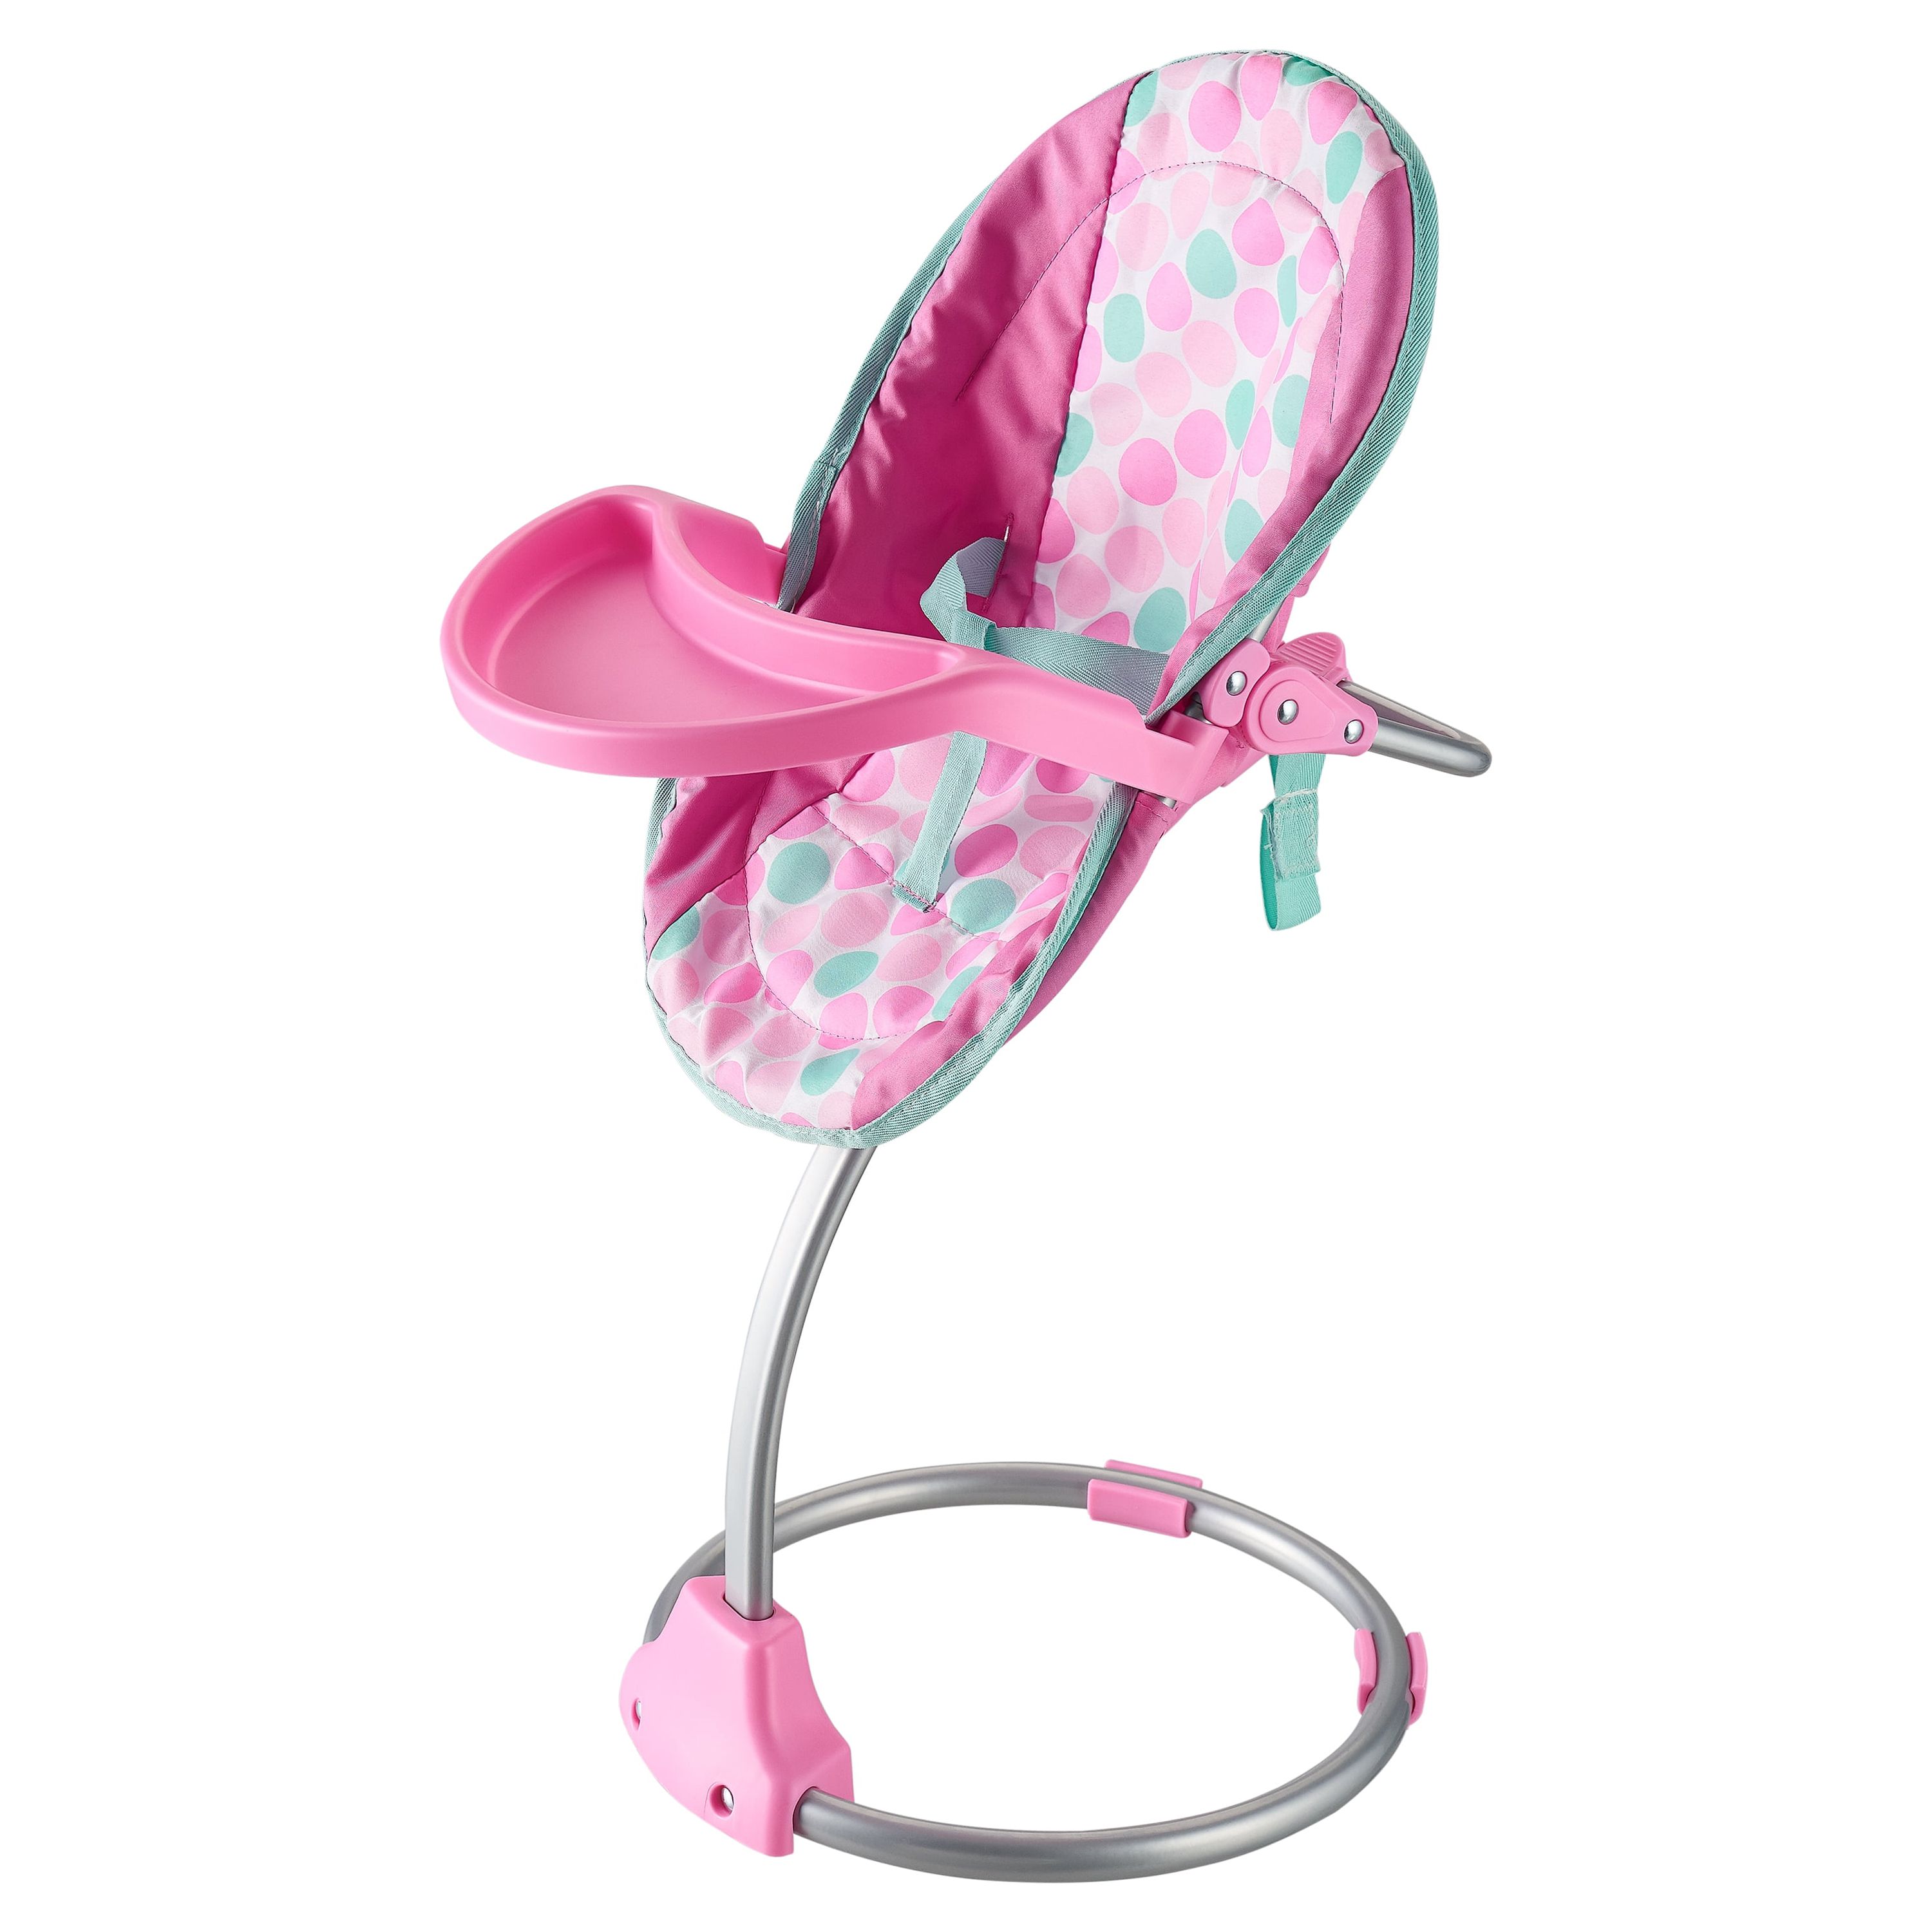 My Sweet Love 3-in-1 High Chair for 18" Dolls - image 1 of 10